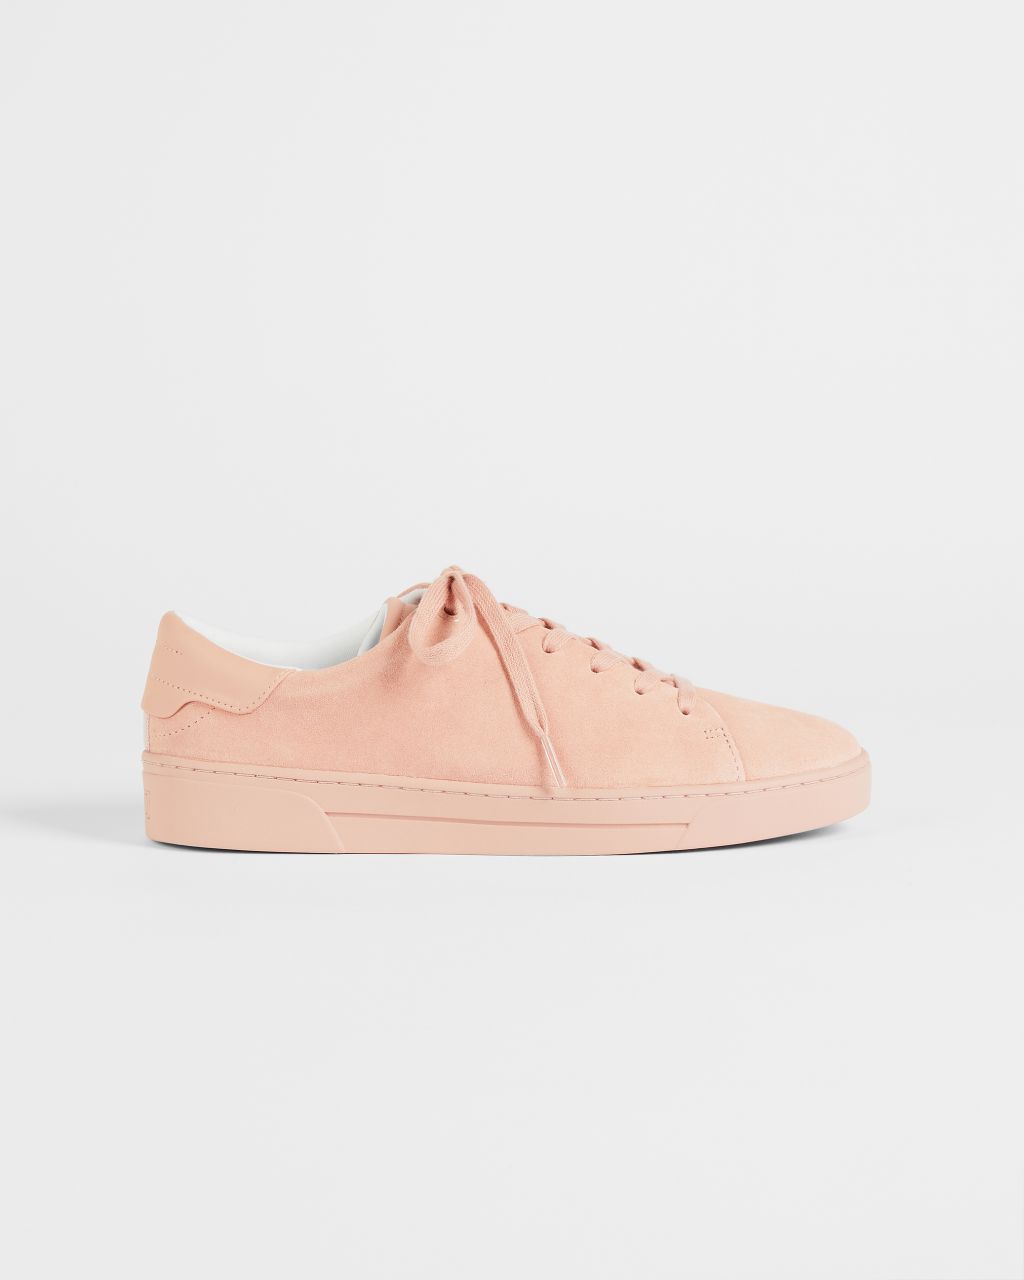 Ted Baker Women's Suede Color Drench Trainer in Dusky Pink, Aryas